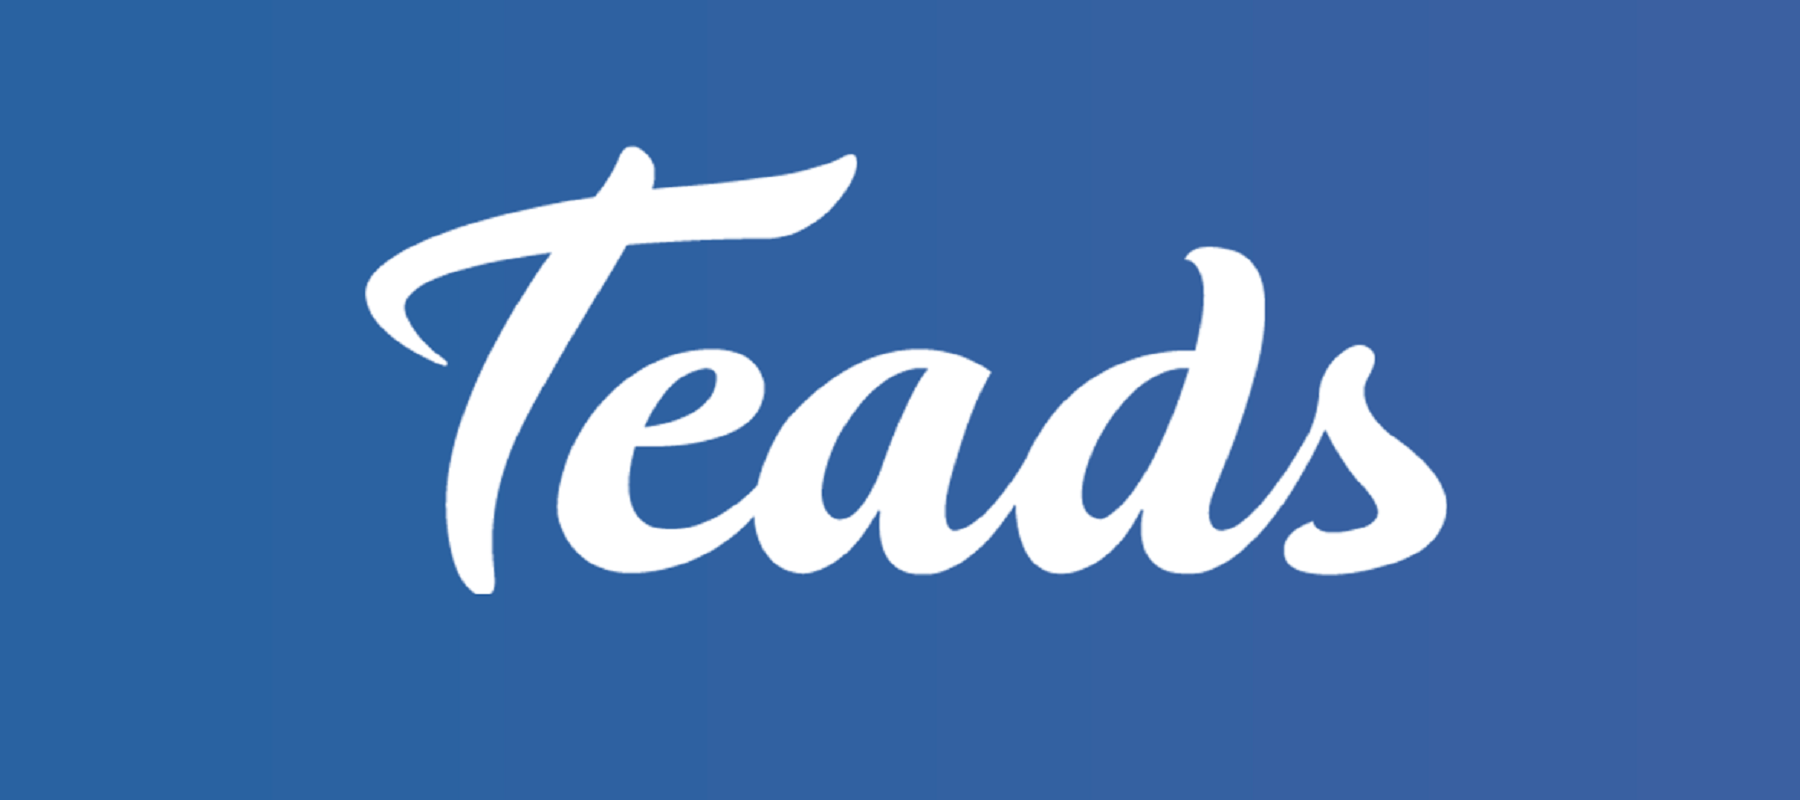 Teads launches AI-powered solutions to help advertisers and publishers achieve full-funnel success